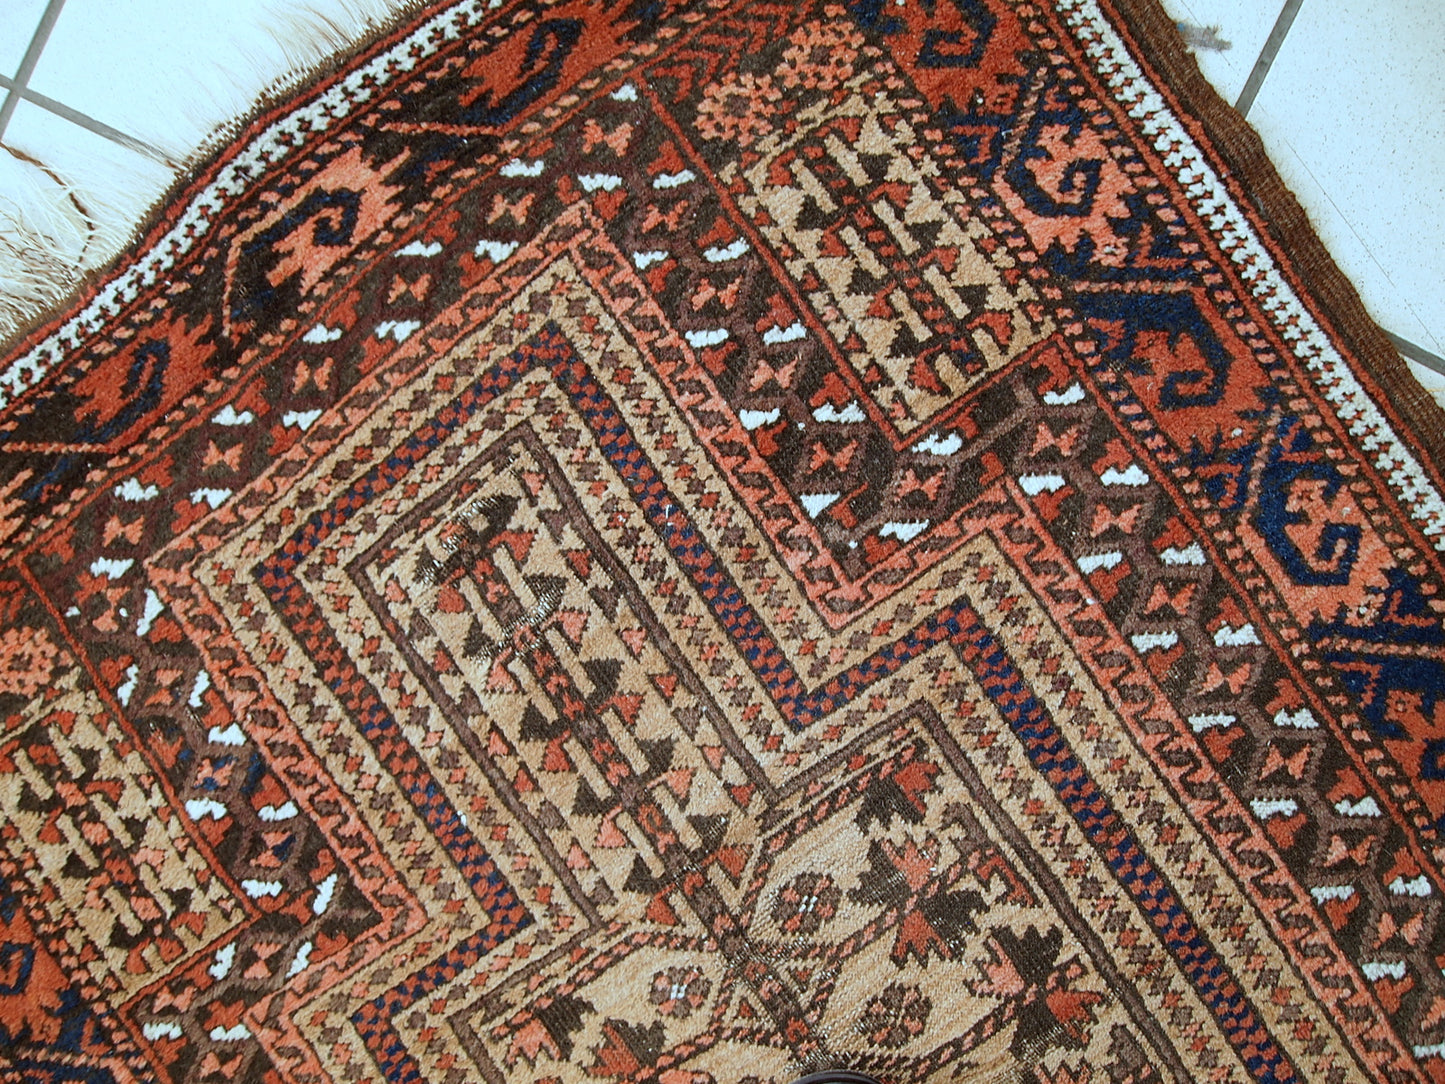 This prayer Baluch rug is in original condition, it has some little age wear and old restoration from the back. Light shade of brown on the field and red decorations. The border has beautiful tribal design in navy blue, pink and red. 